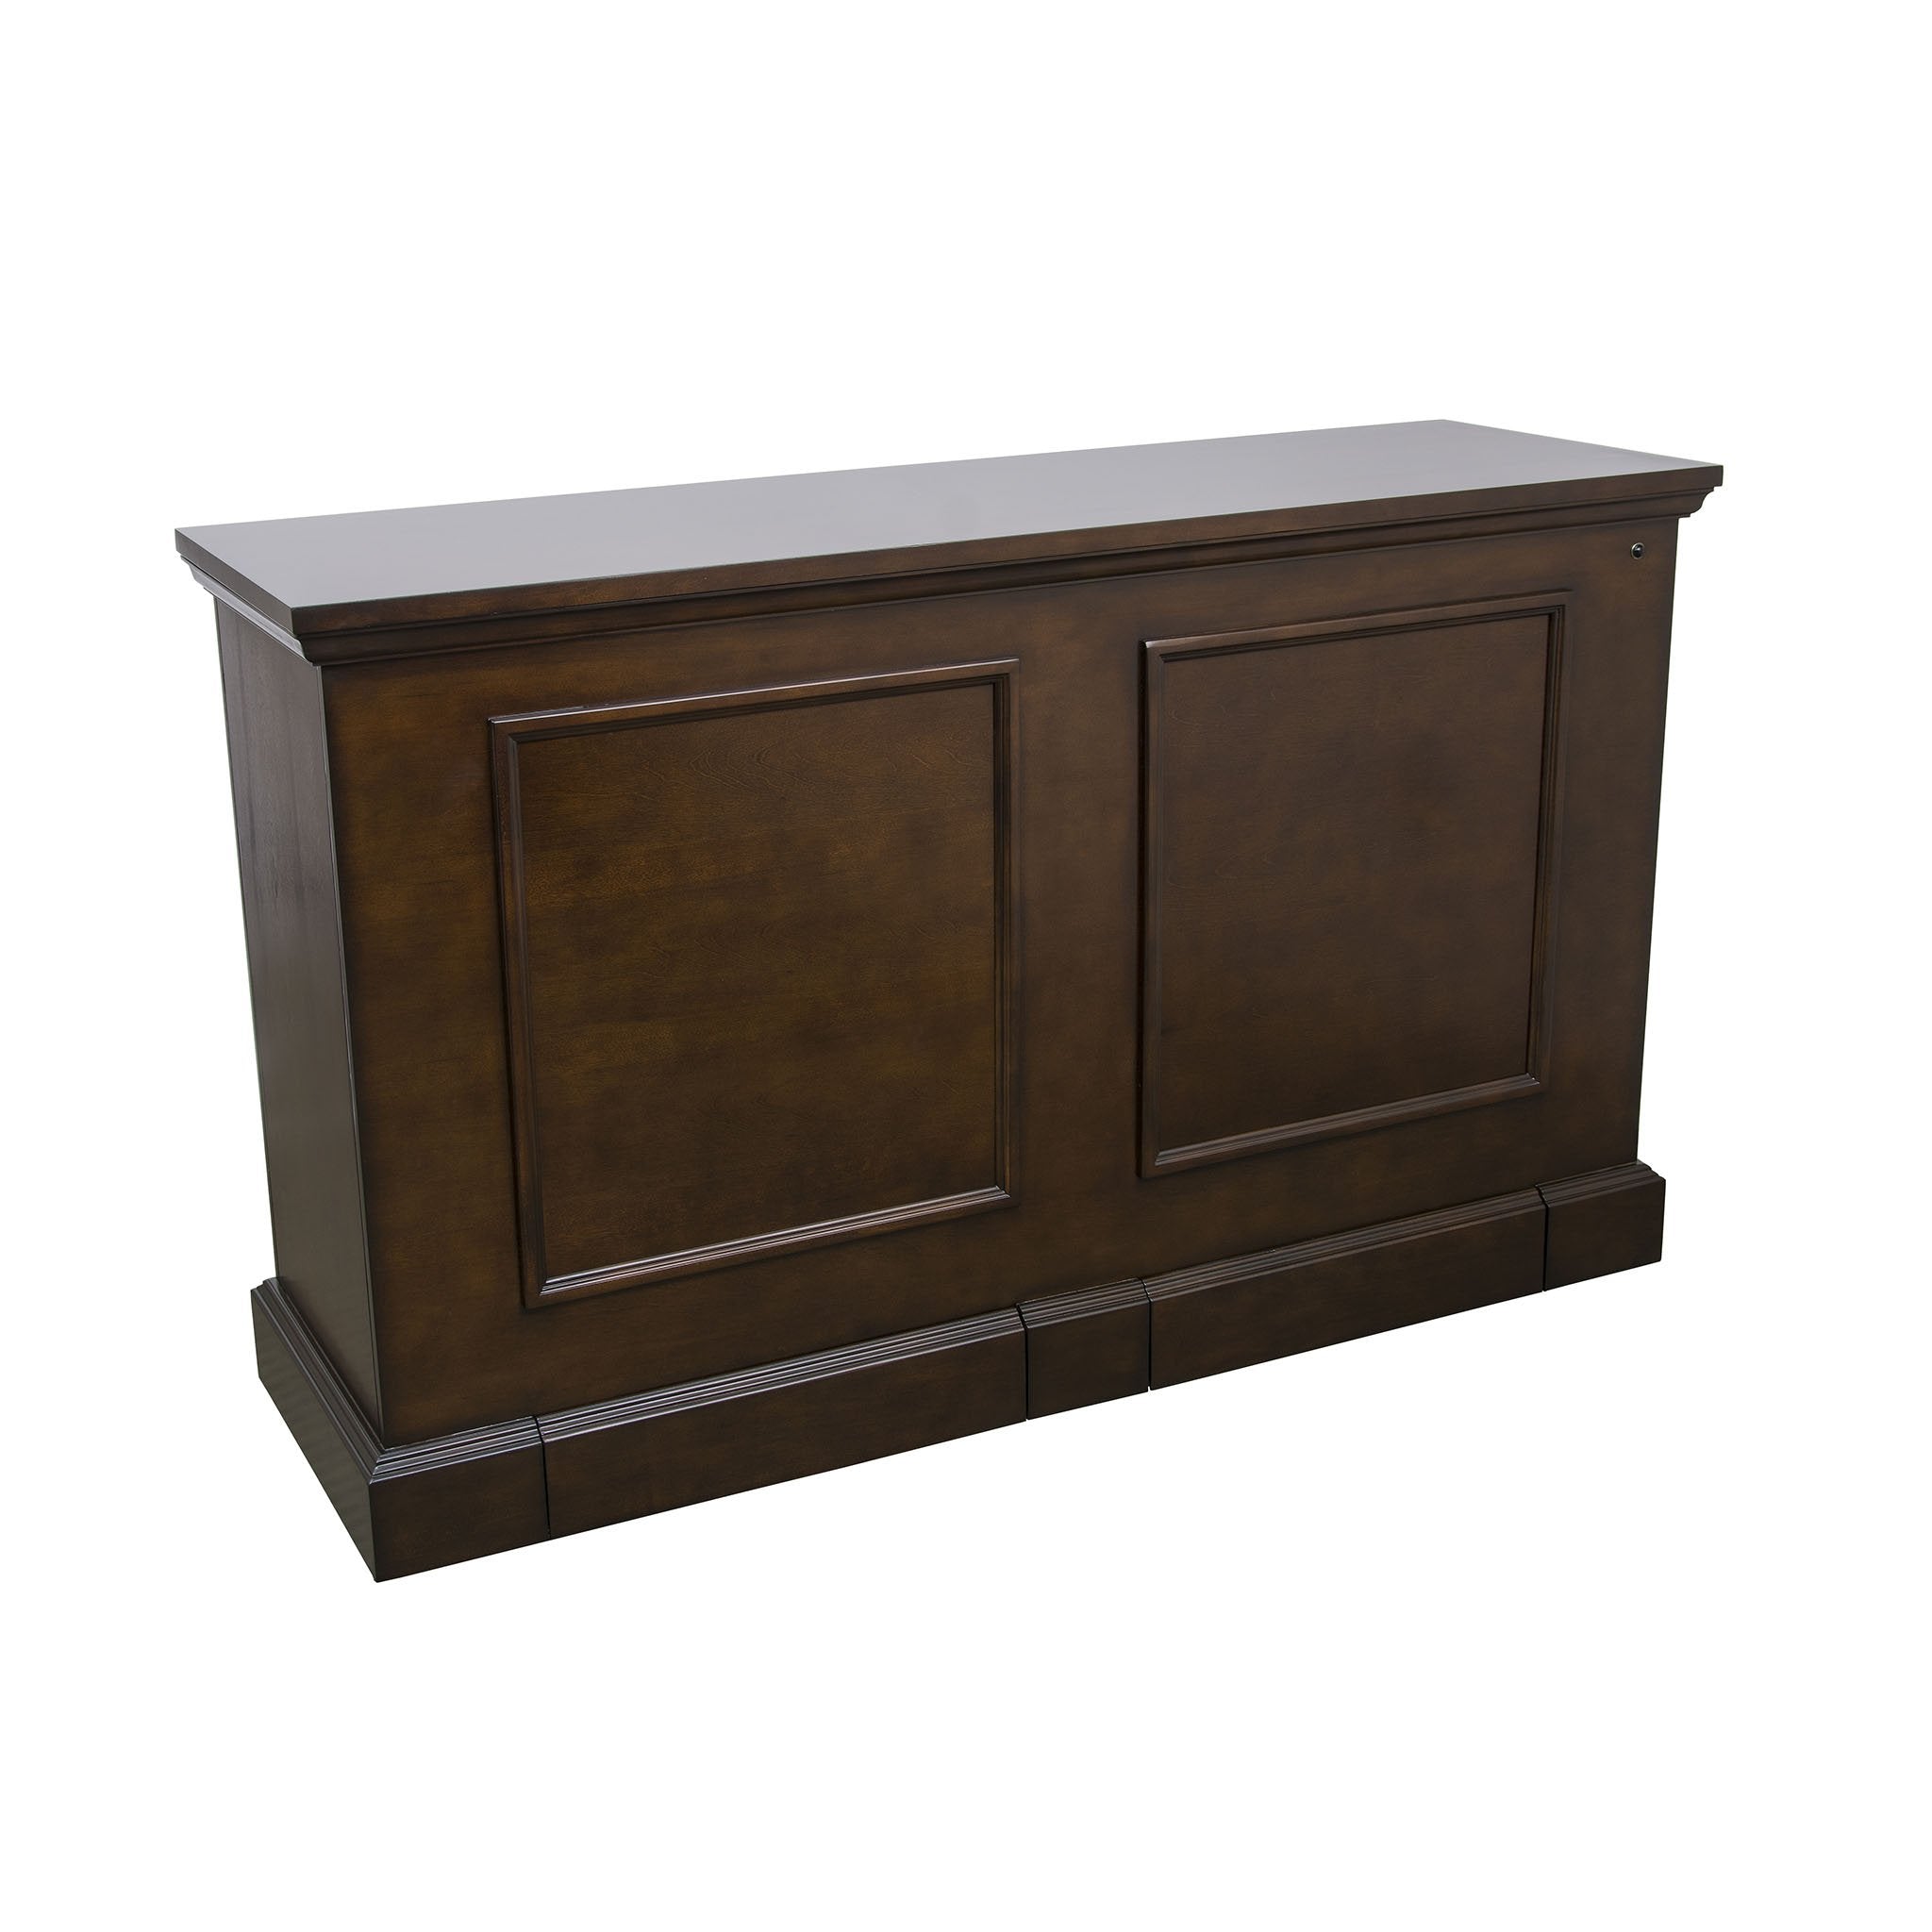 Grand Elevate 74008 Espresso TV Lift Cabinet for 65 inch Flat screen TVs closed on an angle.